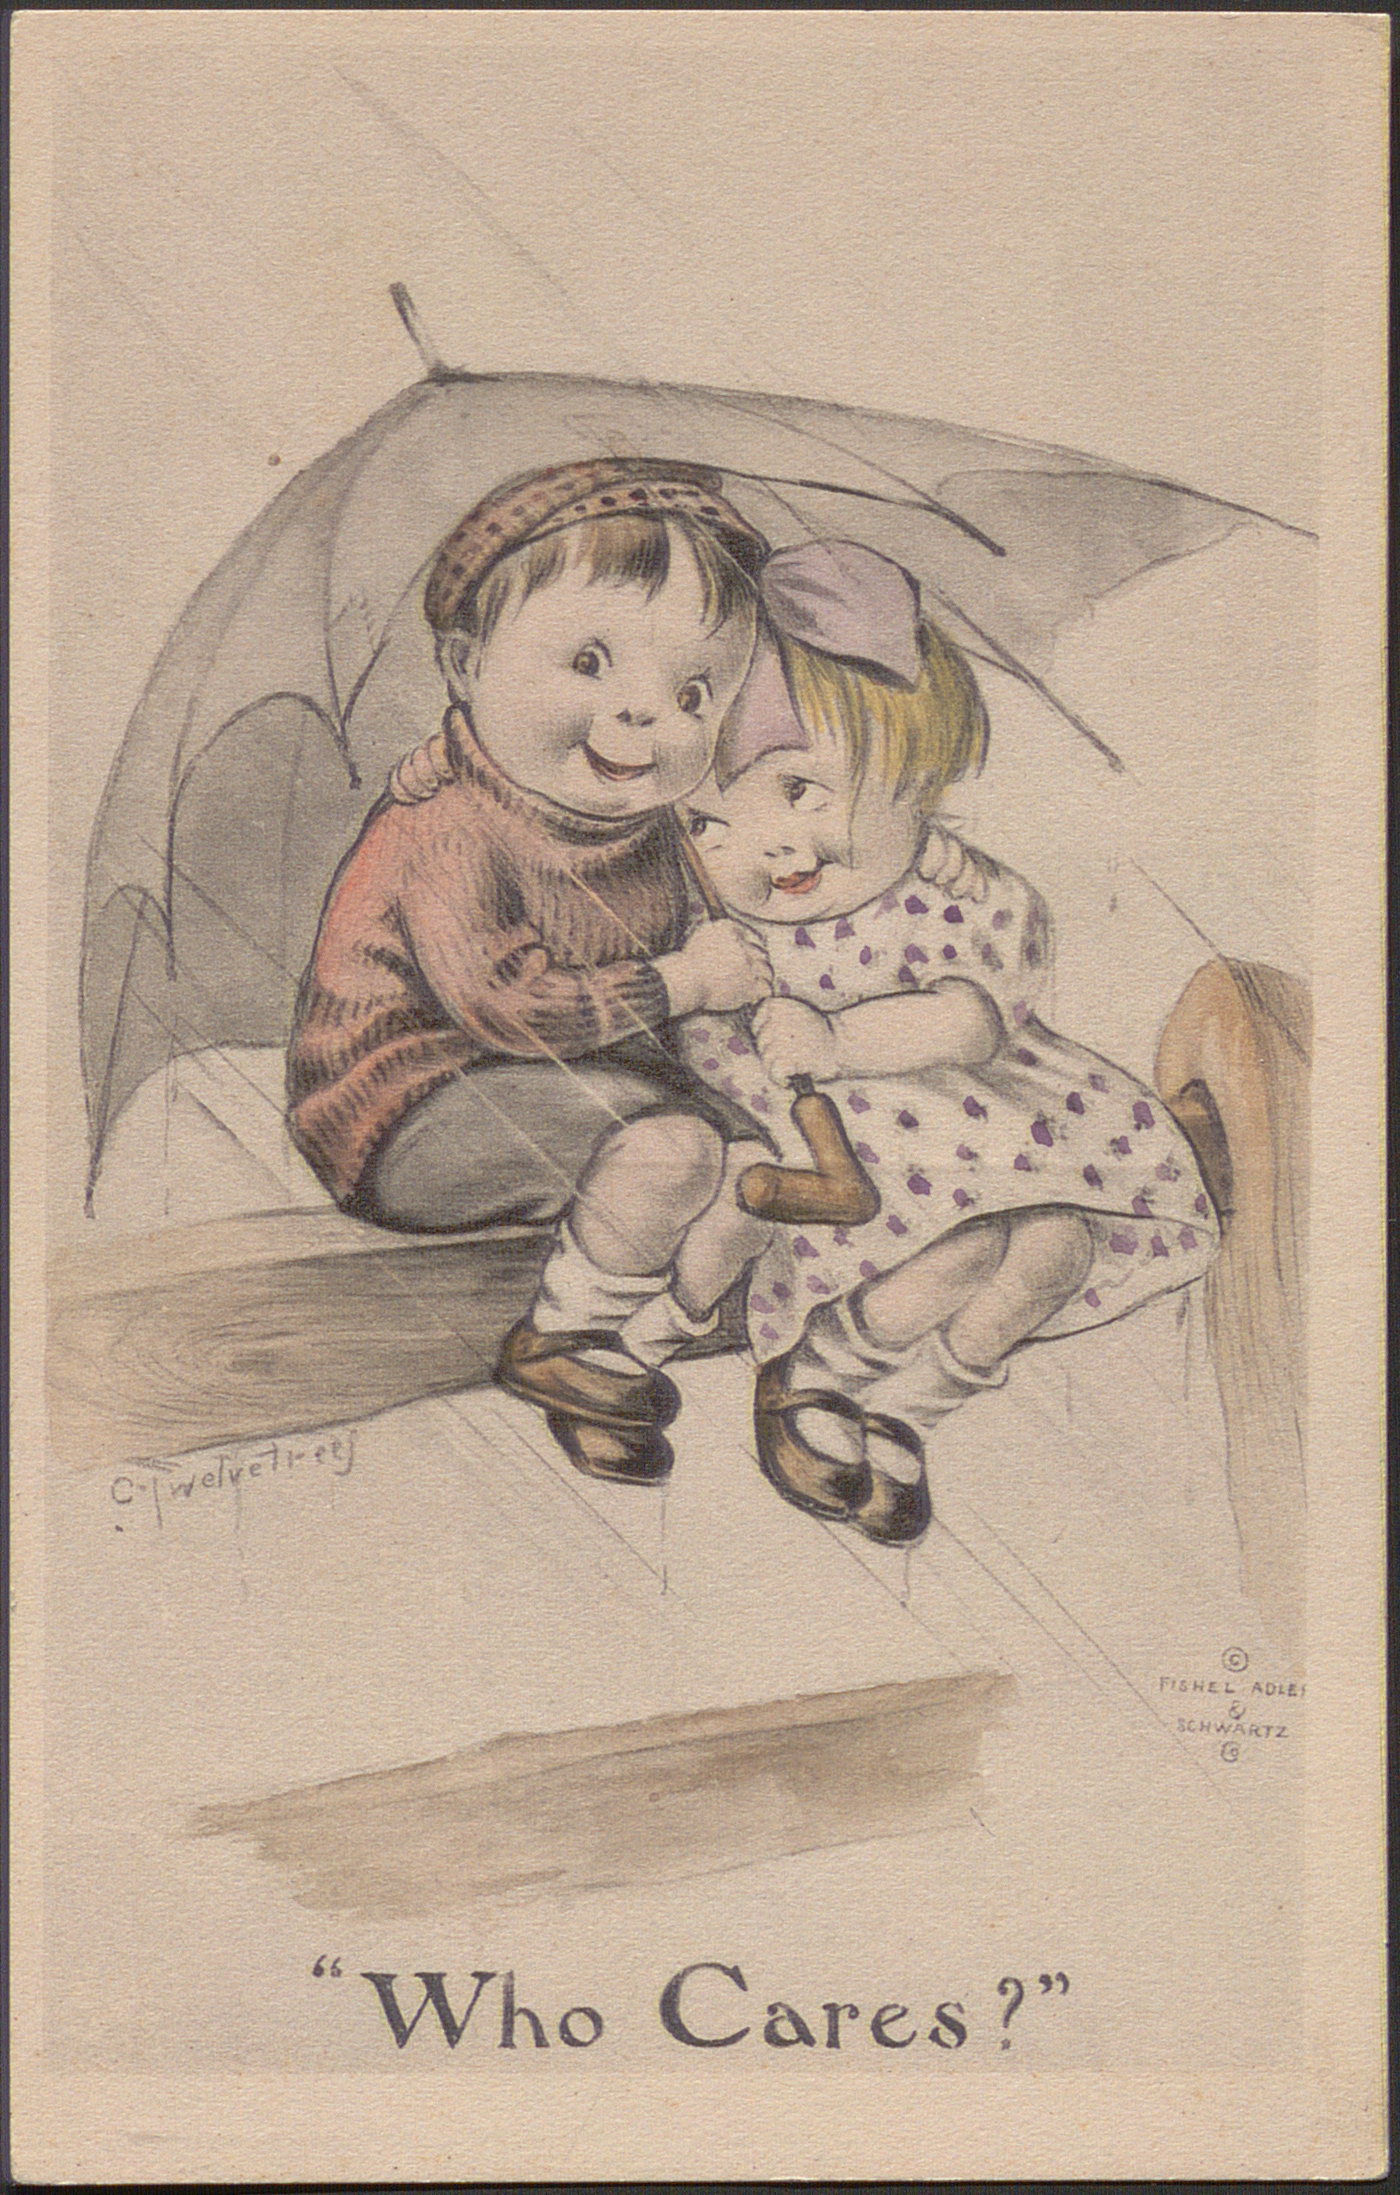 Illustration of two children sitting on a fence, sharing an umbrella. Text reads "Who Cares?"